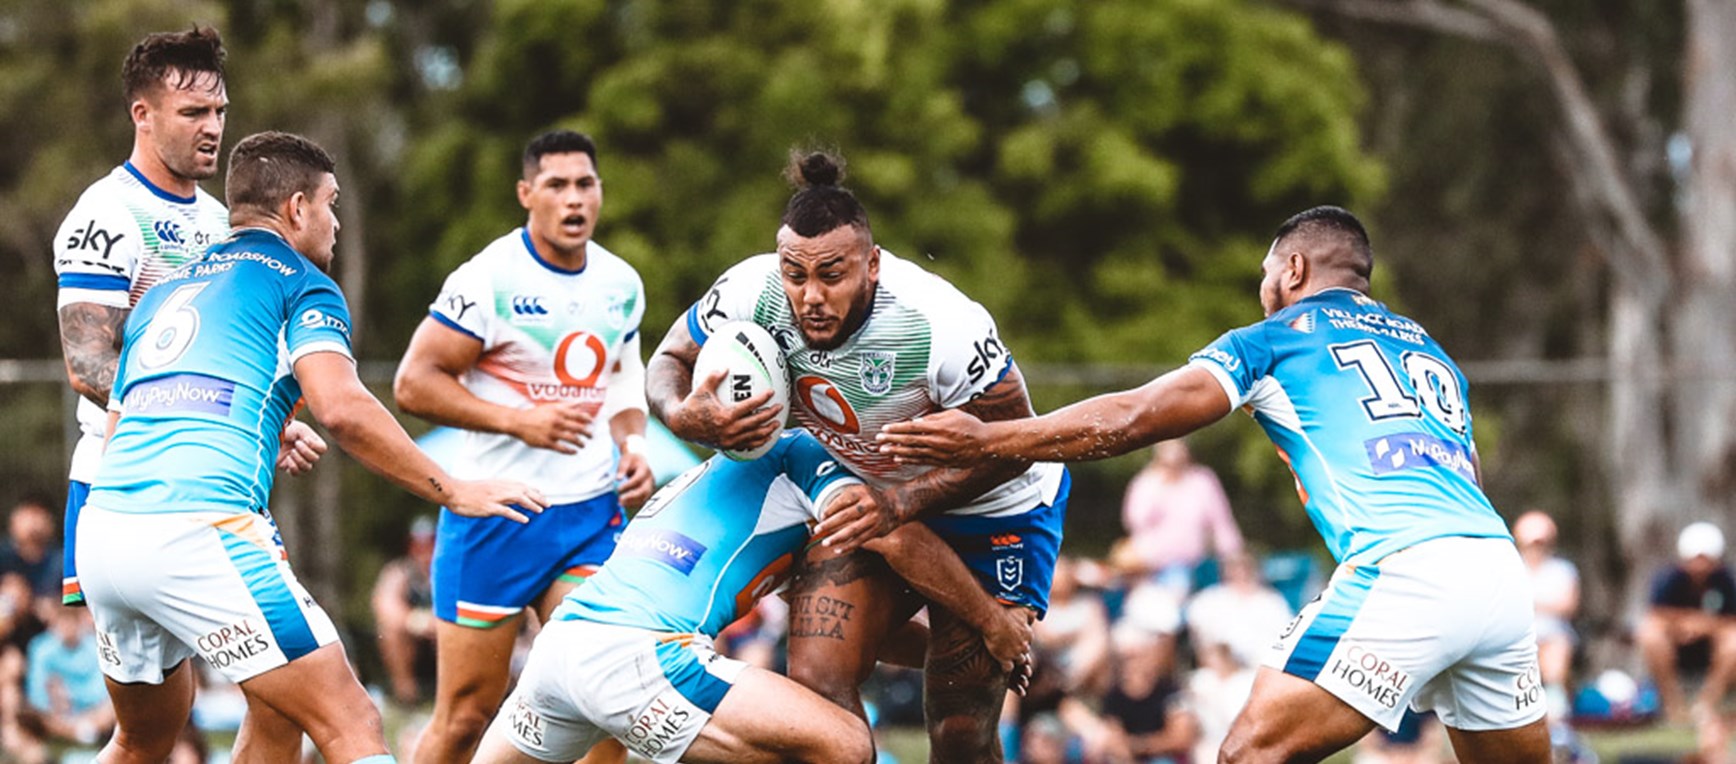 In pictures: Vodafone Warriors' trial against Gold Coast Titans